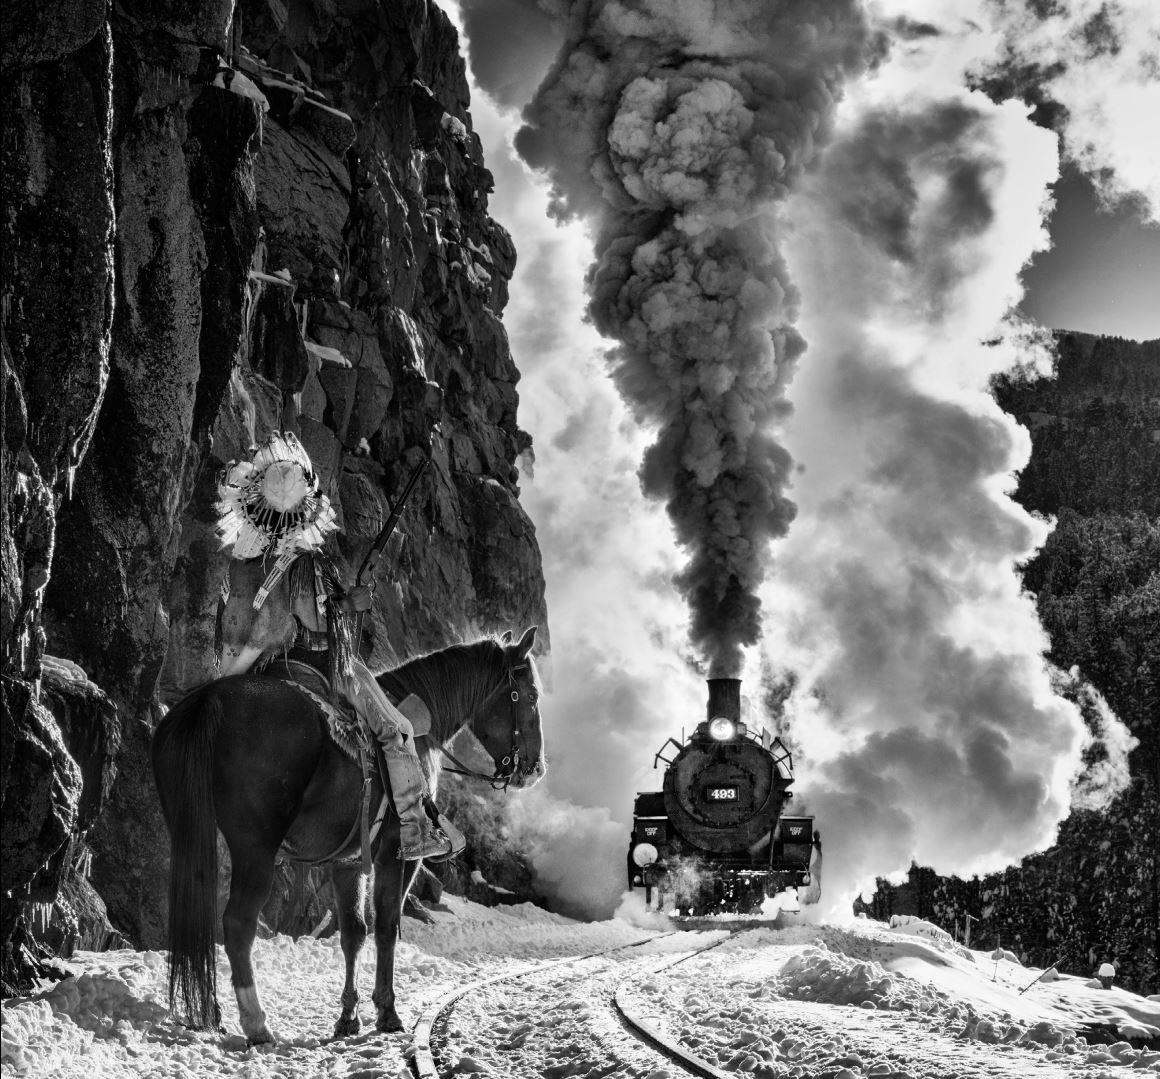 David Yarrow Black and White Photograph - The Manifest Destiny - b&w photograph showing a train and a native american 